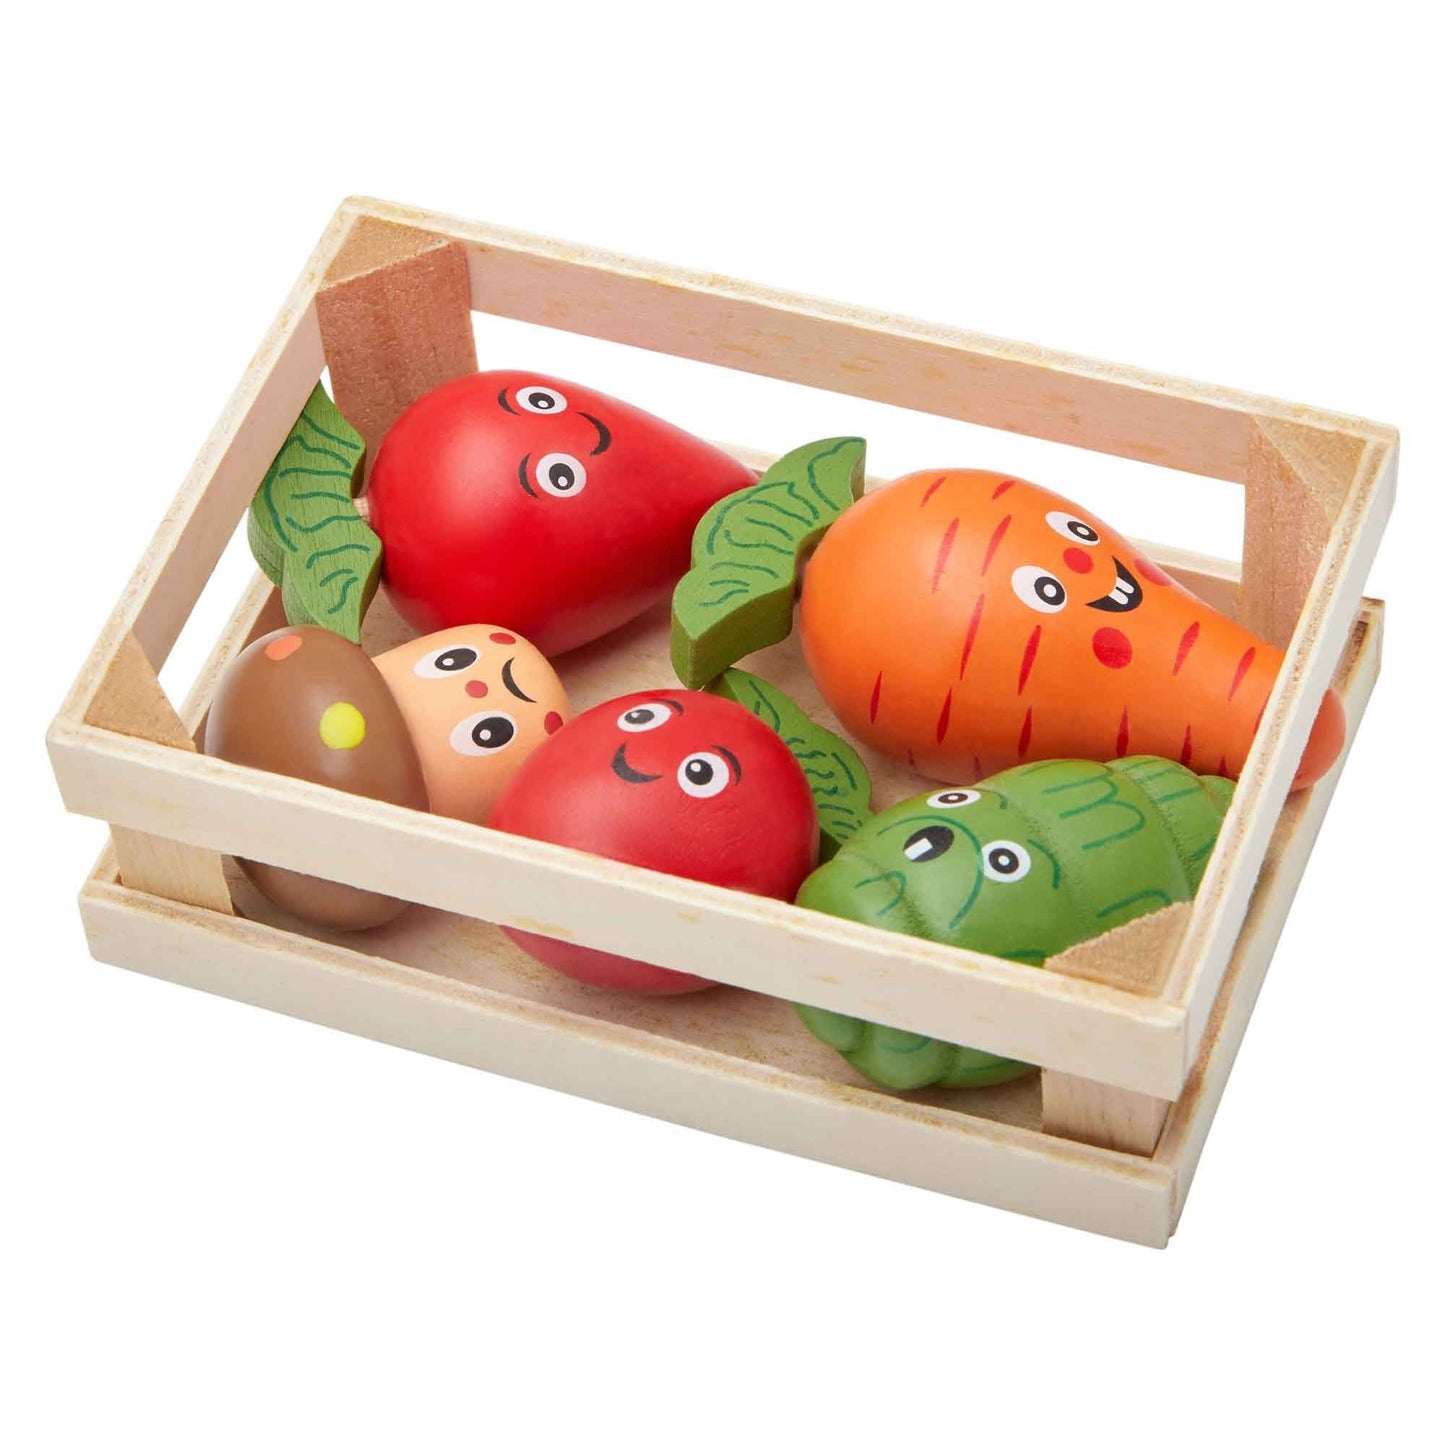 Lexi & Me Small Animal Wooden Chew Toy Veggie Crate